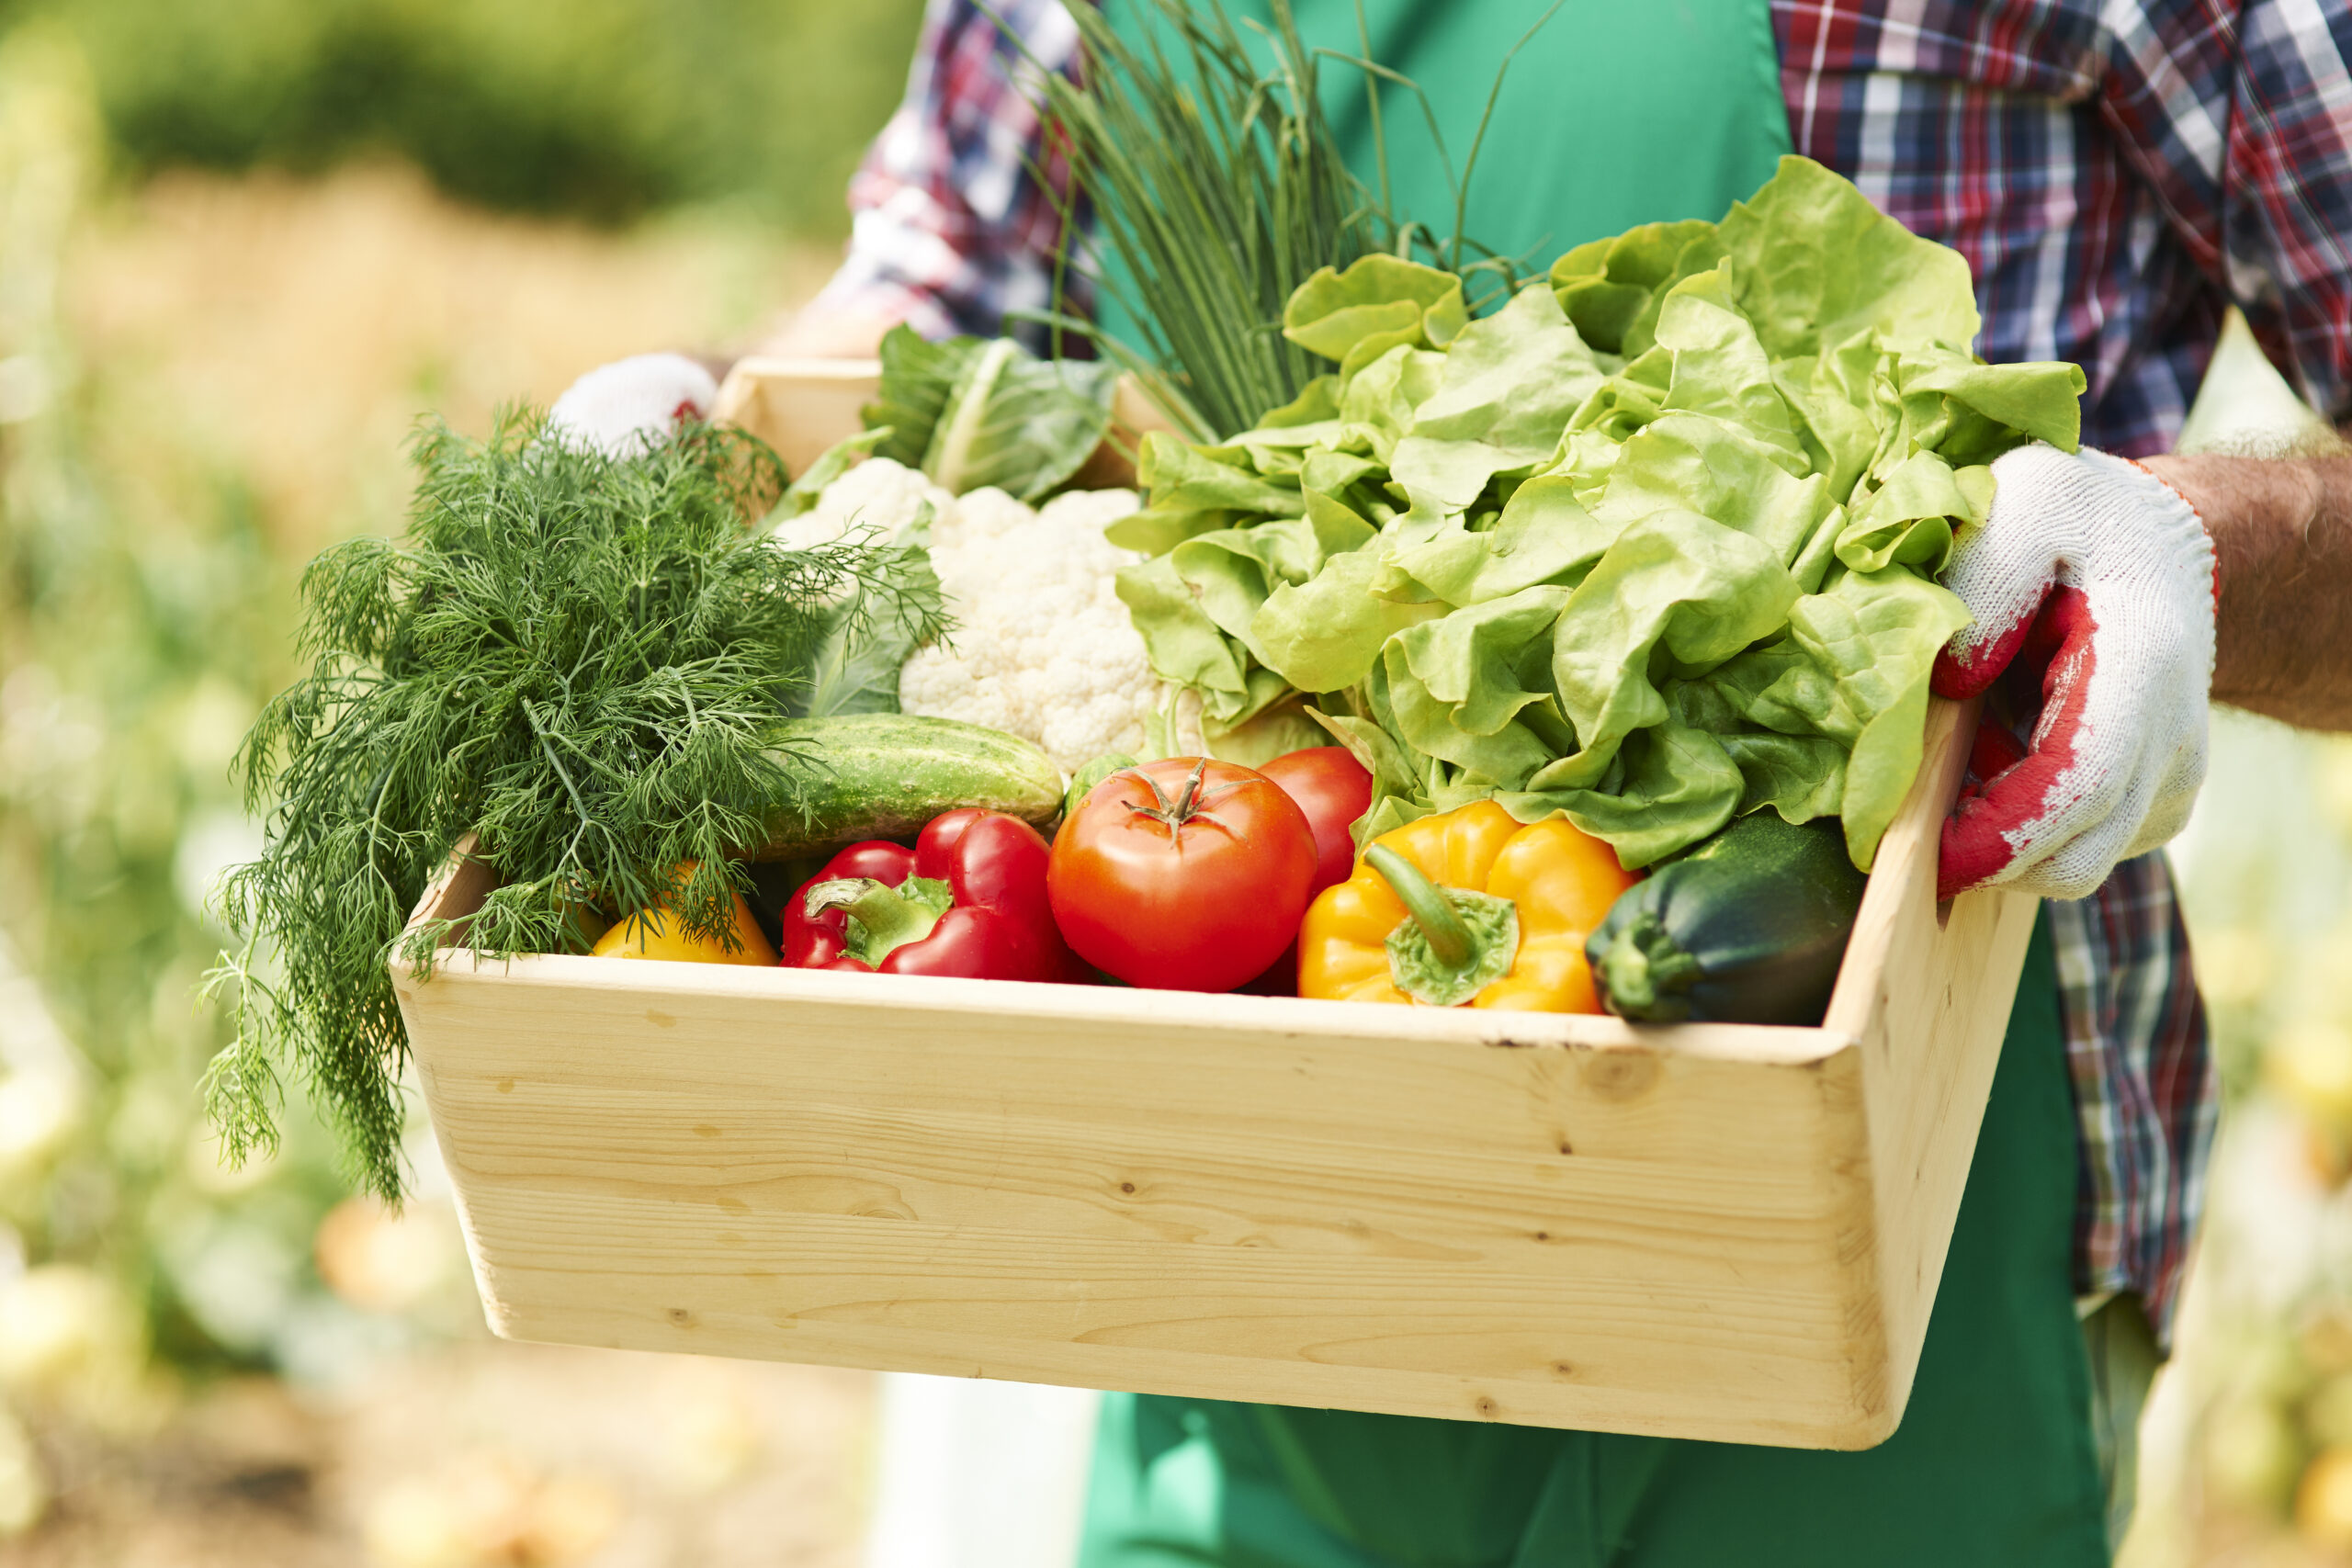 close-up-of-box-with-vegetables-in-hands-of-mature-man-scaled-1.jpg